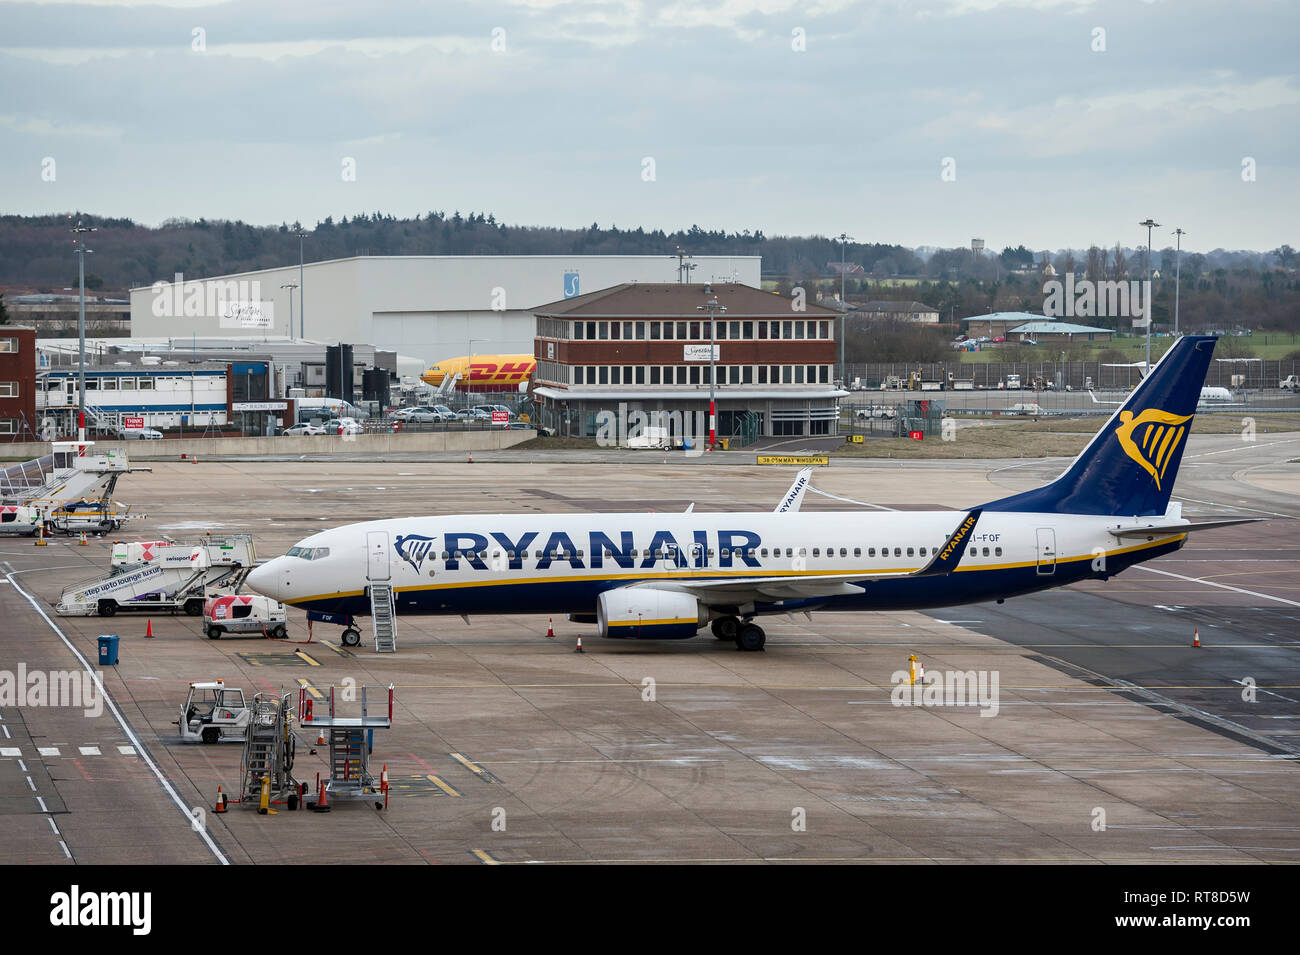 Ryanair aircraft waiting on the apron area of Luton airport, England. Stock Photo